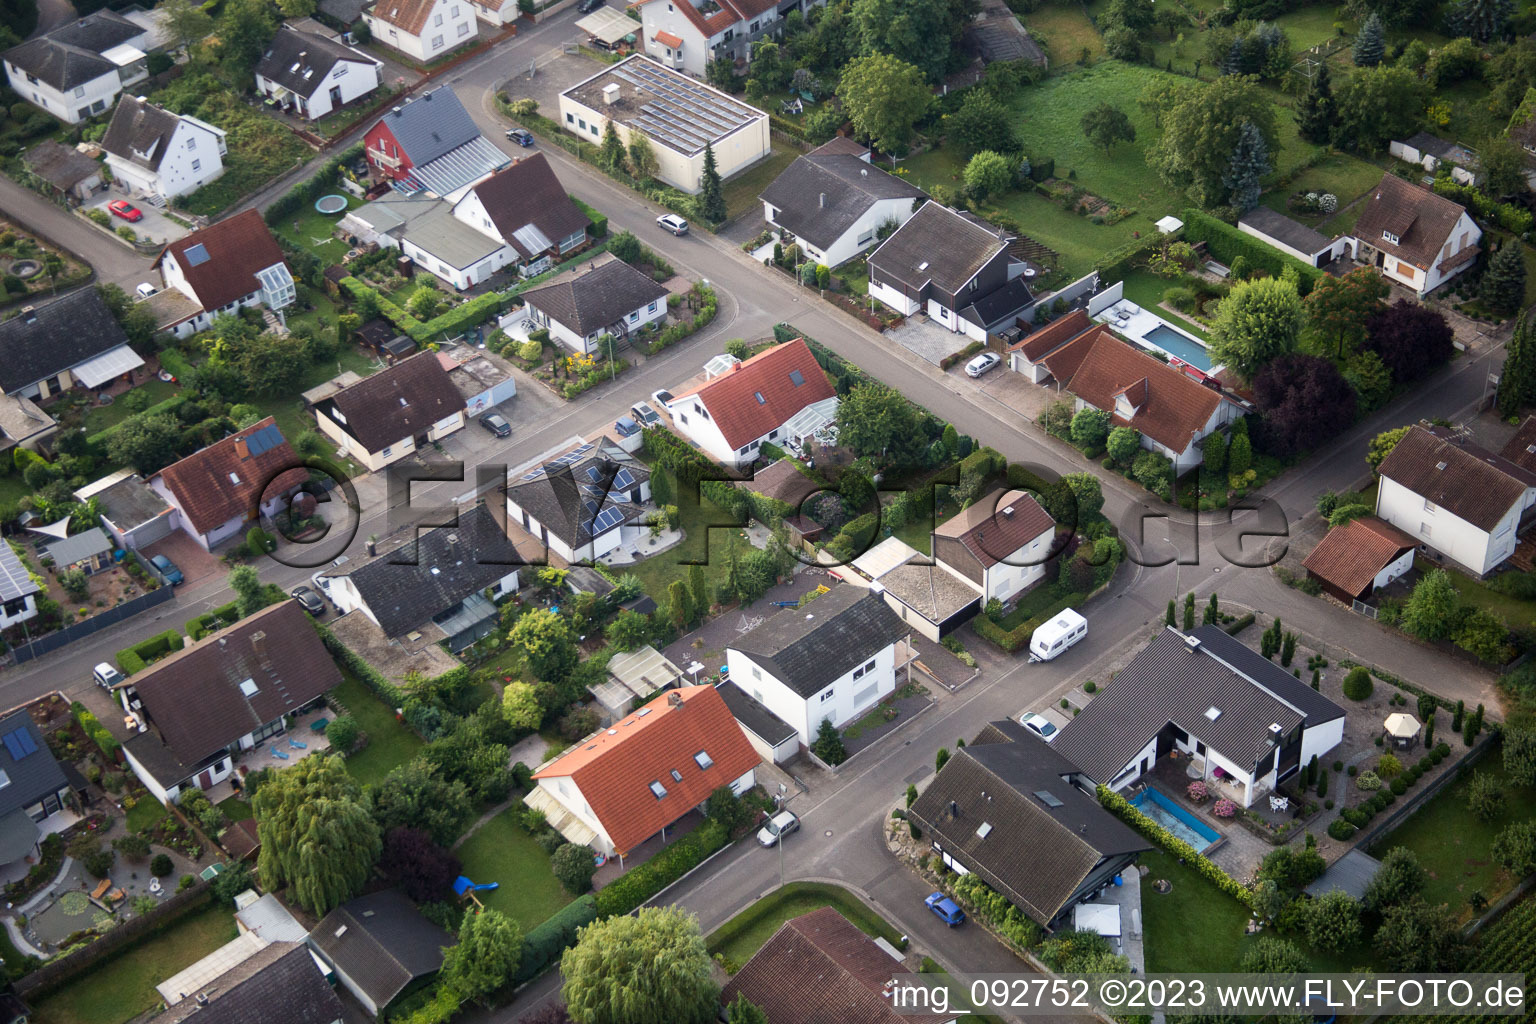 Drone image of Maxburgstr in the district Billigheim in Billigheim-Ingenheim in the state Rhineland-Palatinate, Germany